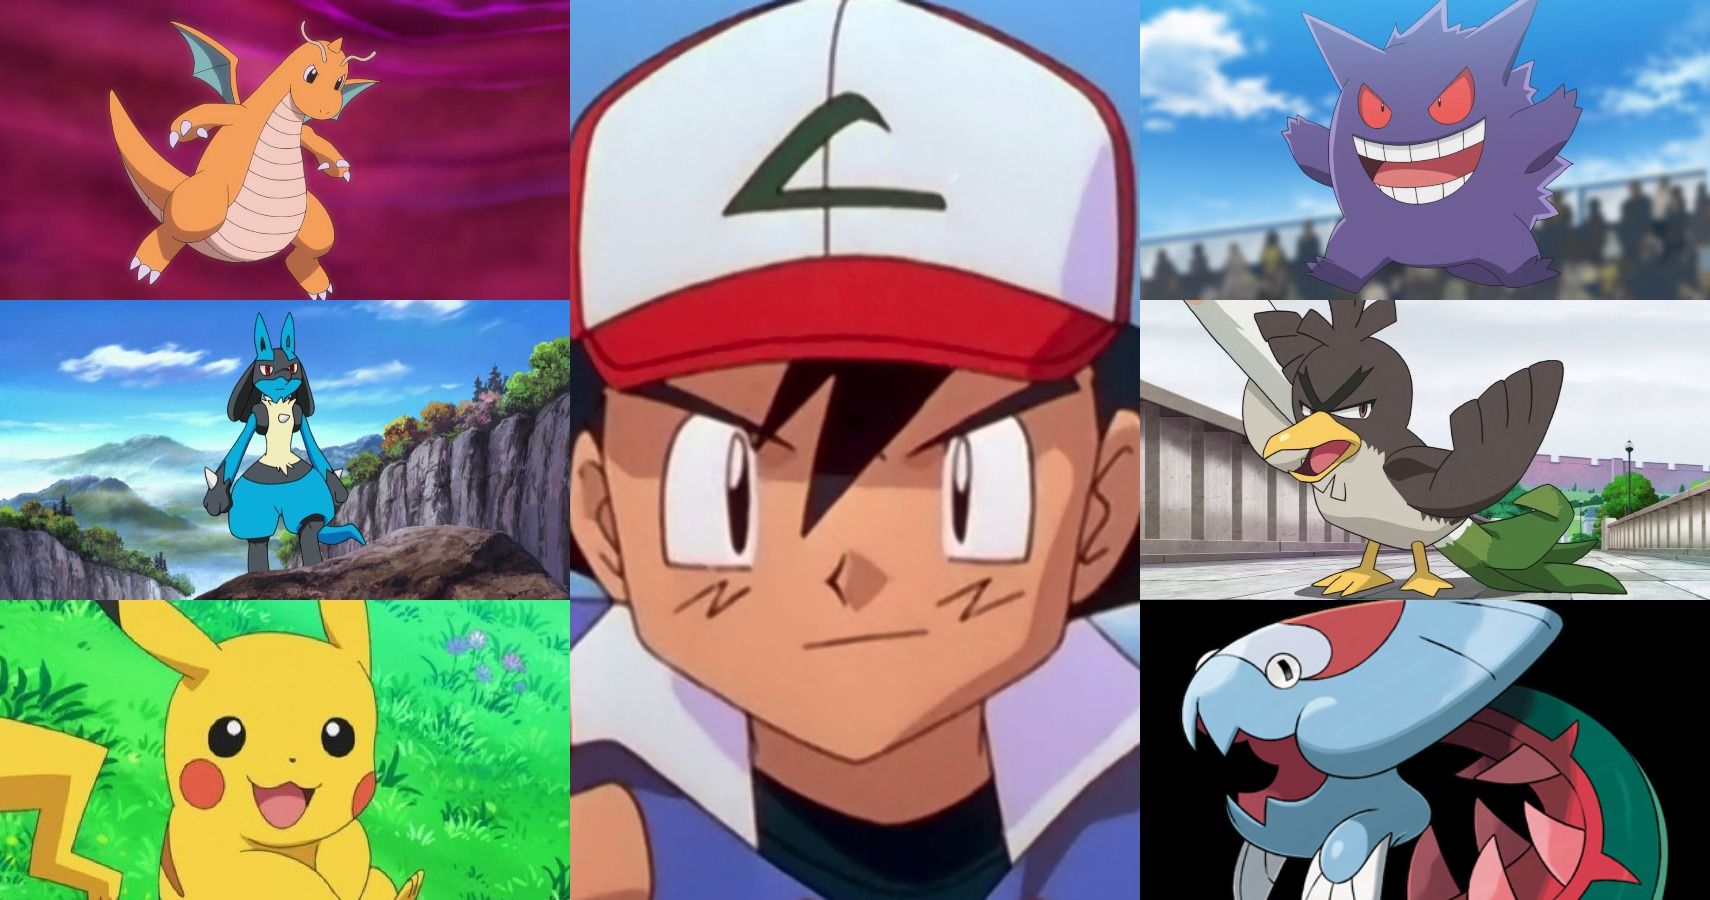 Ash Ketchum's Pokémon career, as judged by a competitive expert 